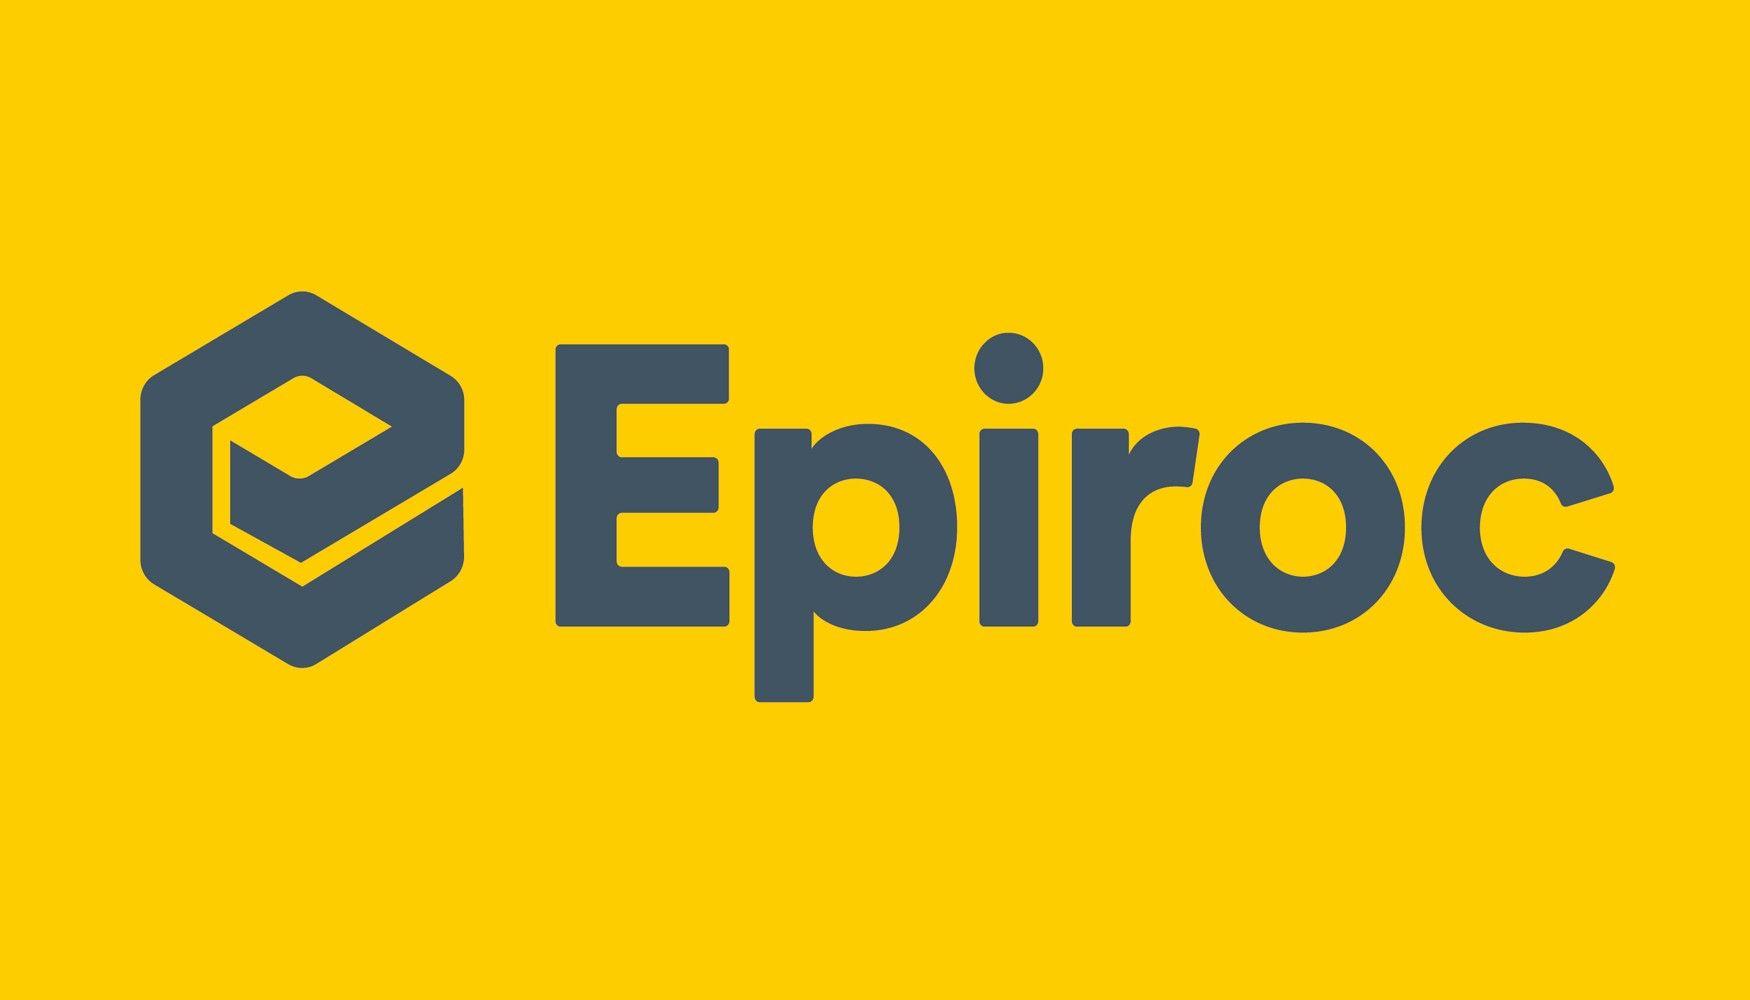 Epiroc Logo - Epiroc Products - Breakers, Cutters, Compactors and more...